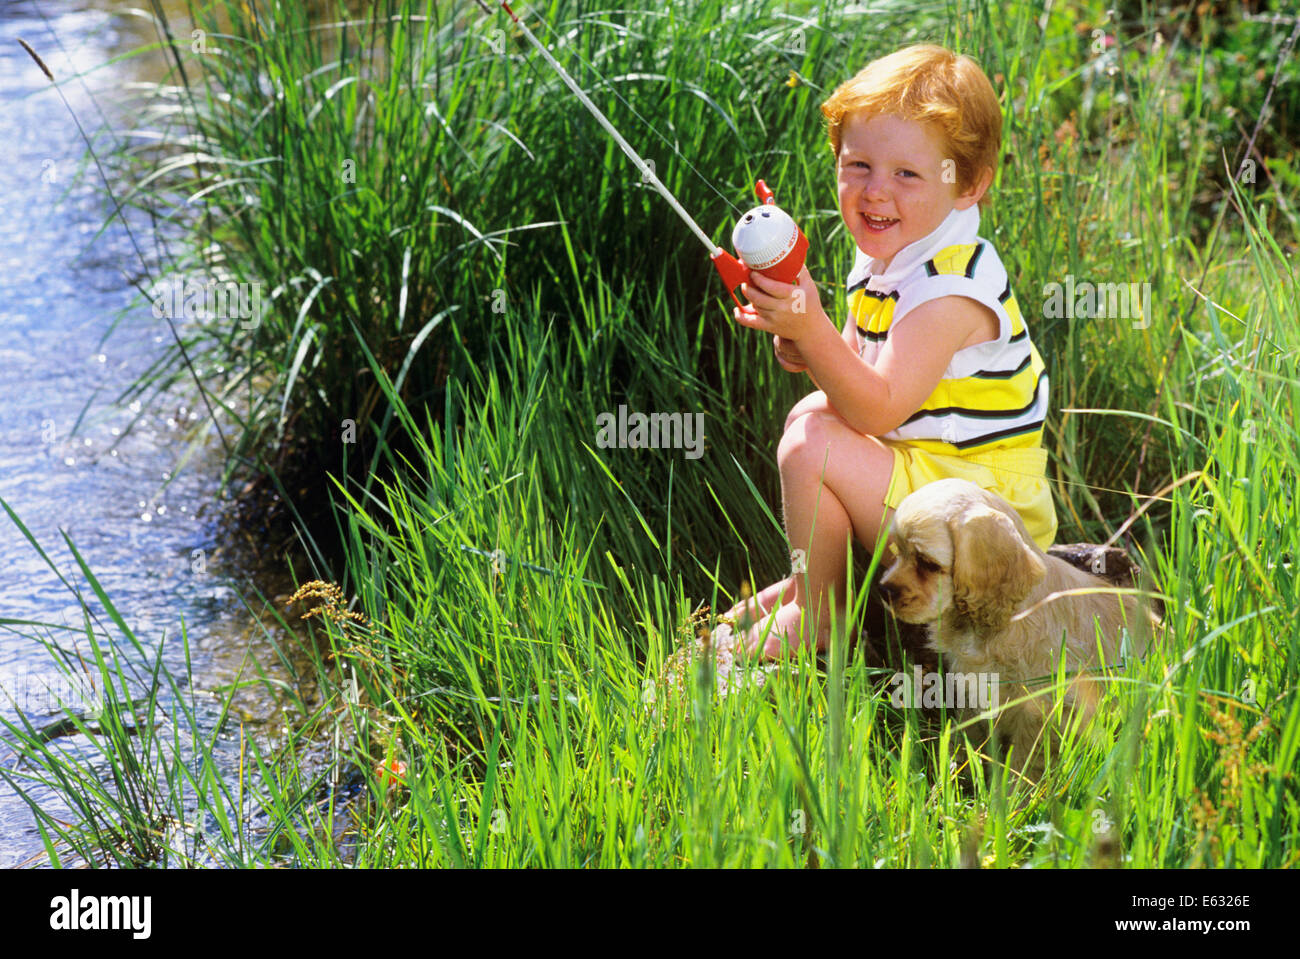 REDHEADED BOY FISHING FROM BANK WITH COCKER SPANIEL BESIDE HIM Stock Photo